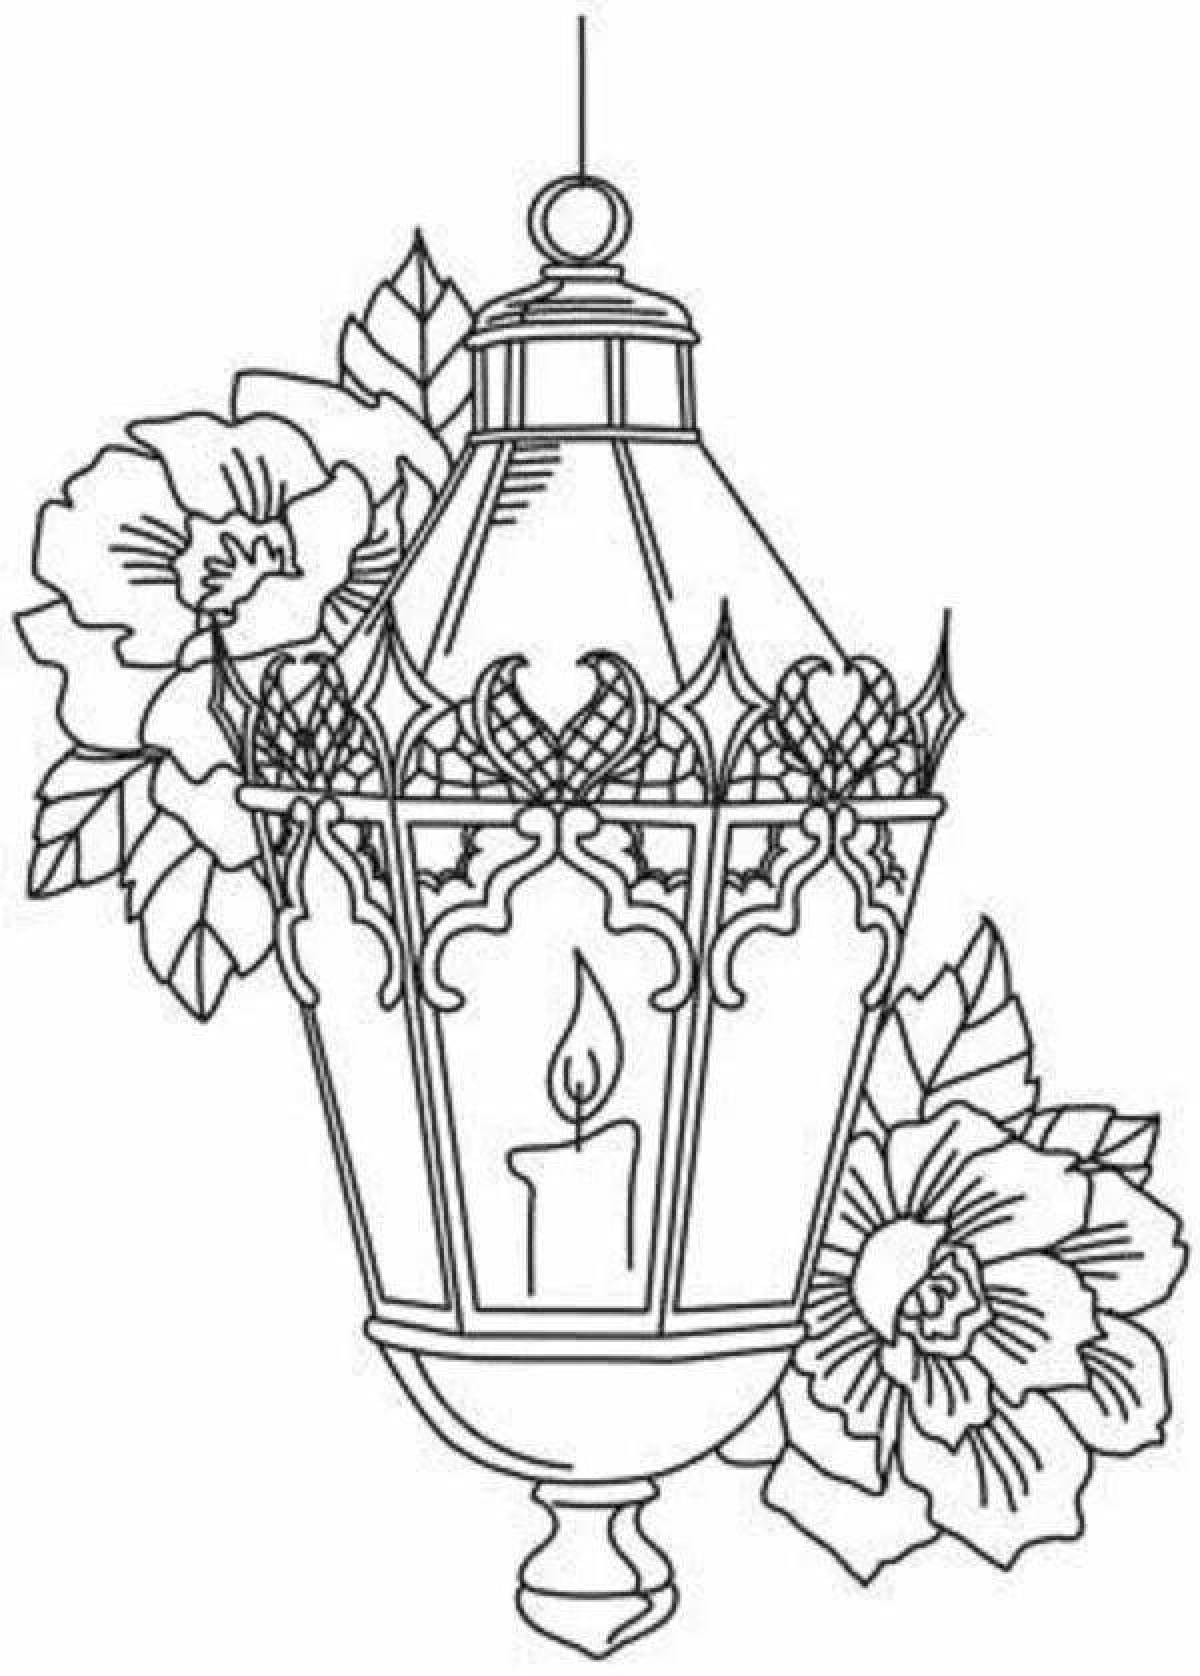 Coloring page cute street lamp